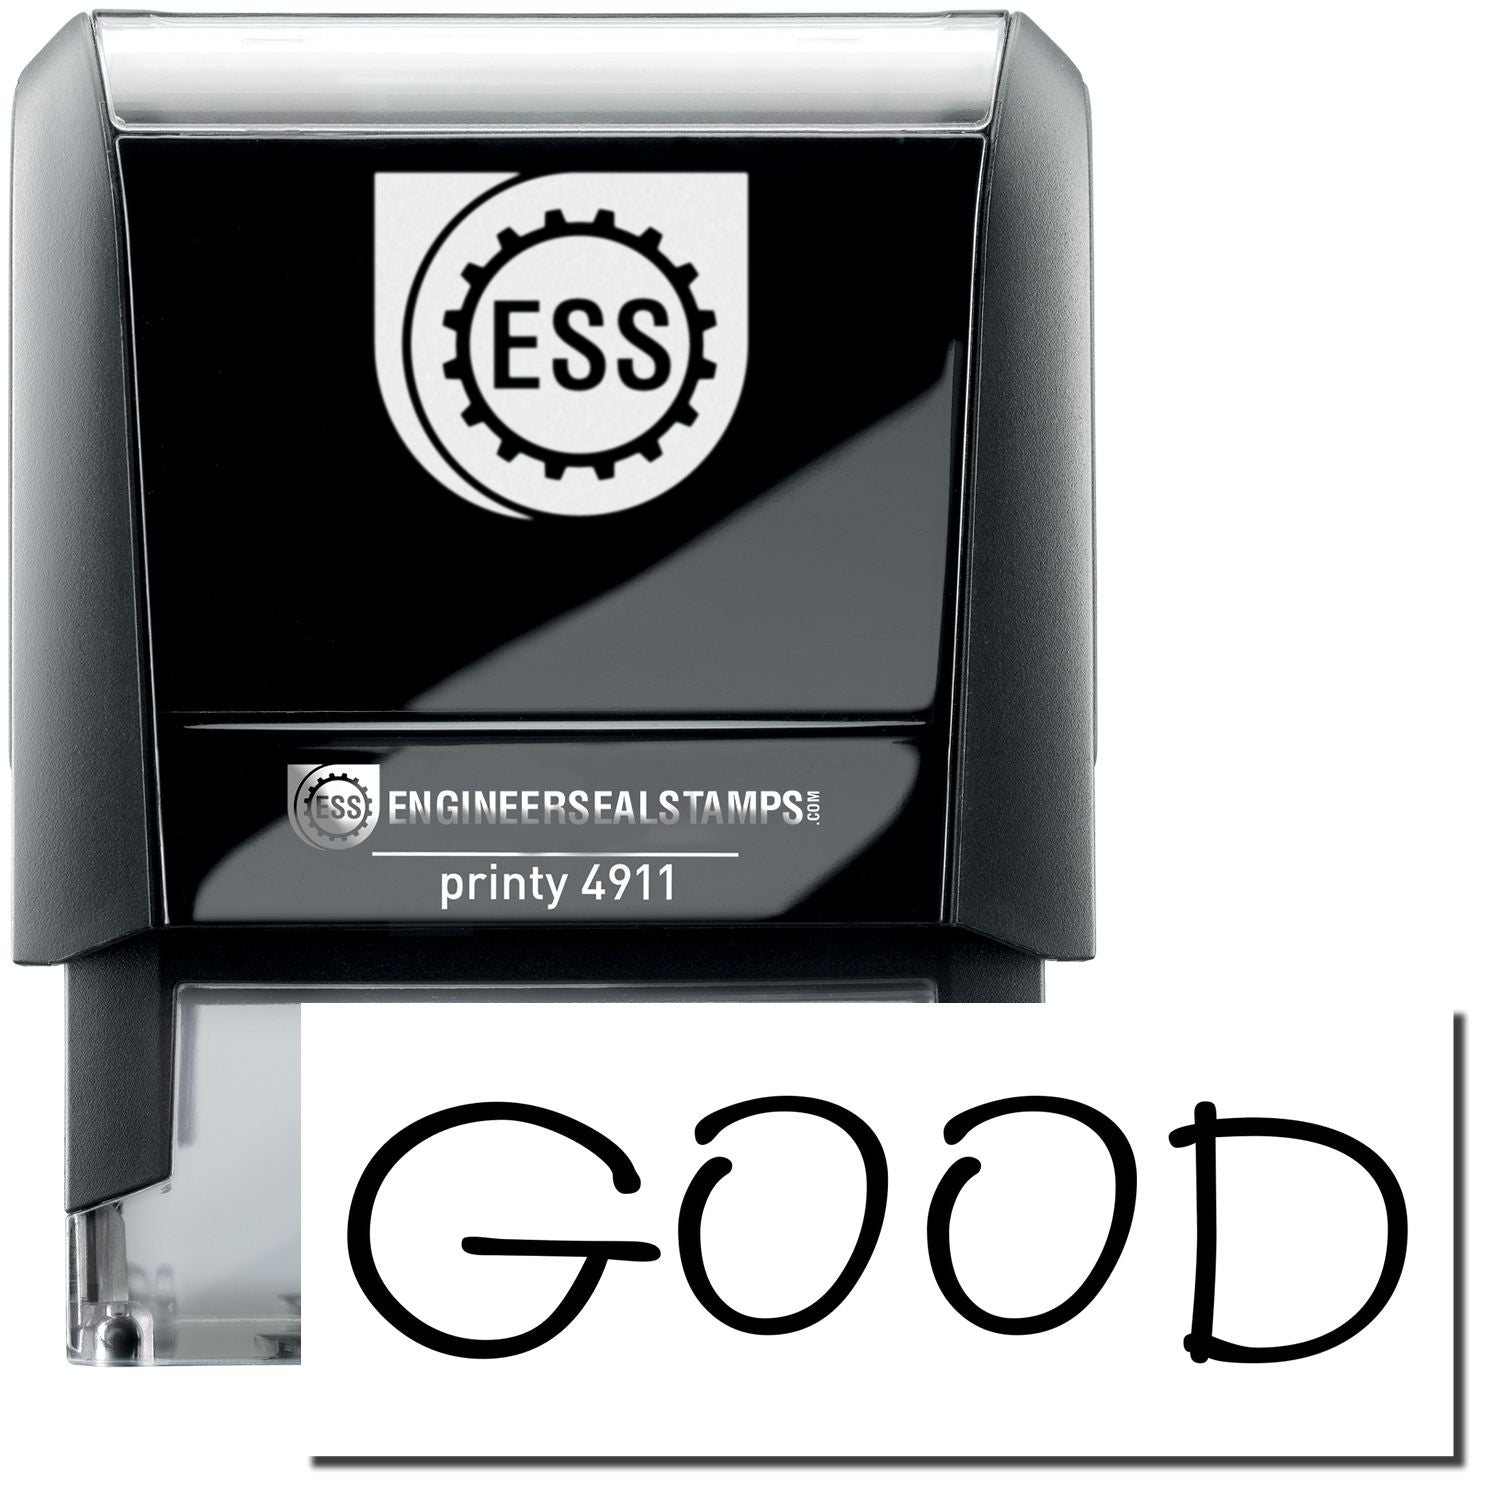 A self-inking stamp with a stamped image showing how the text "GOOD" is displayed after stamping.